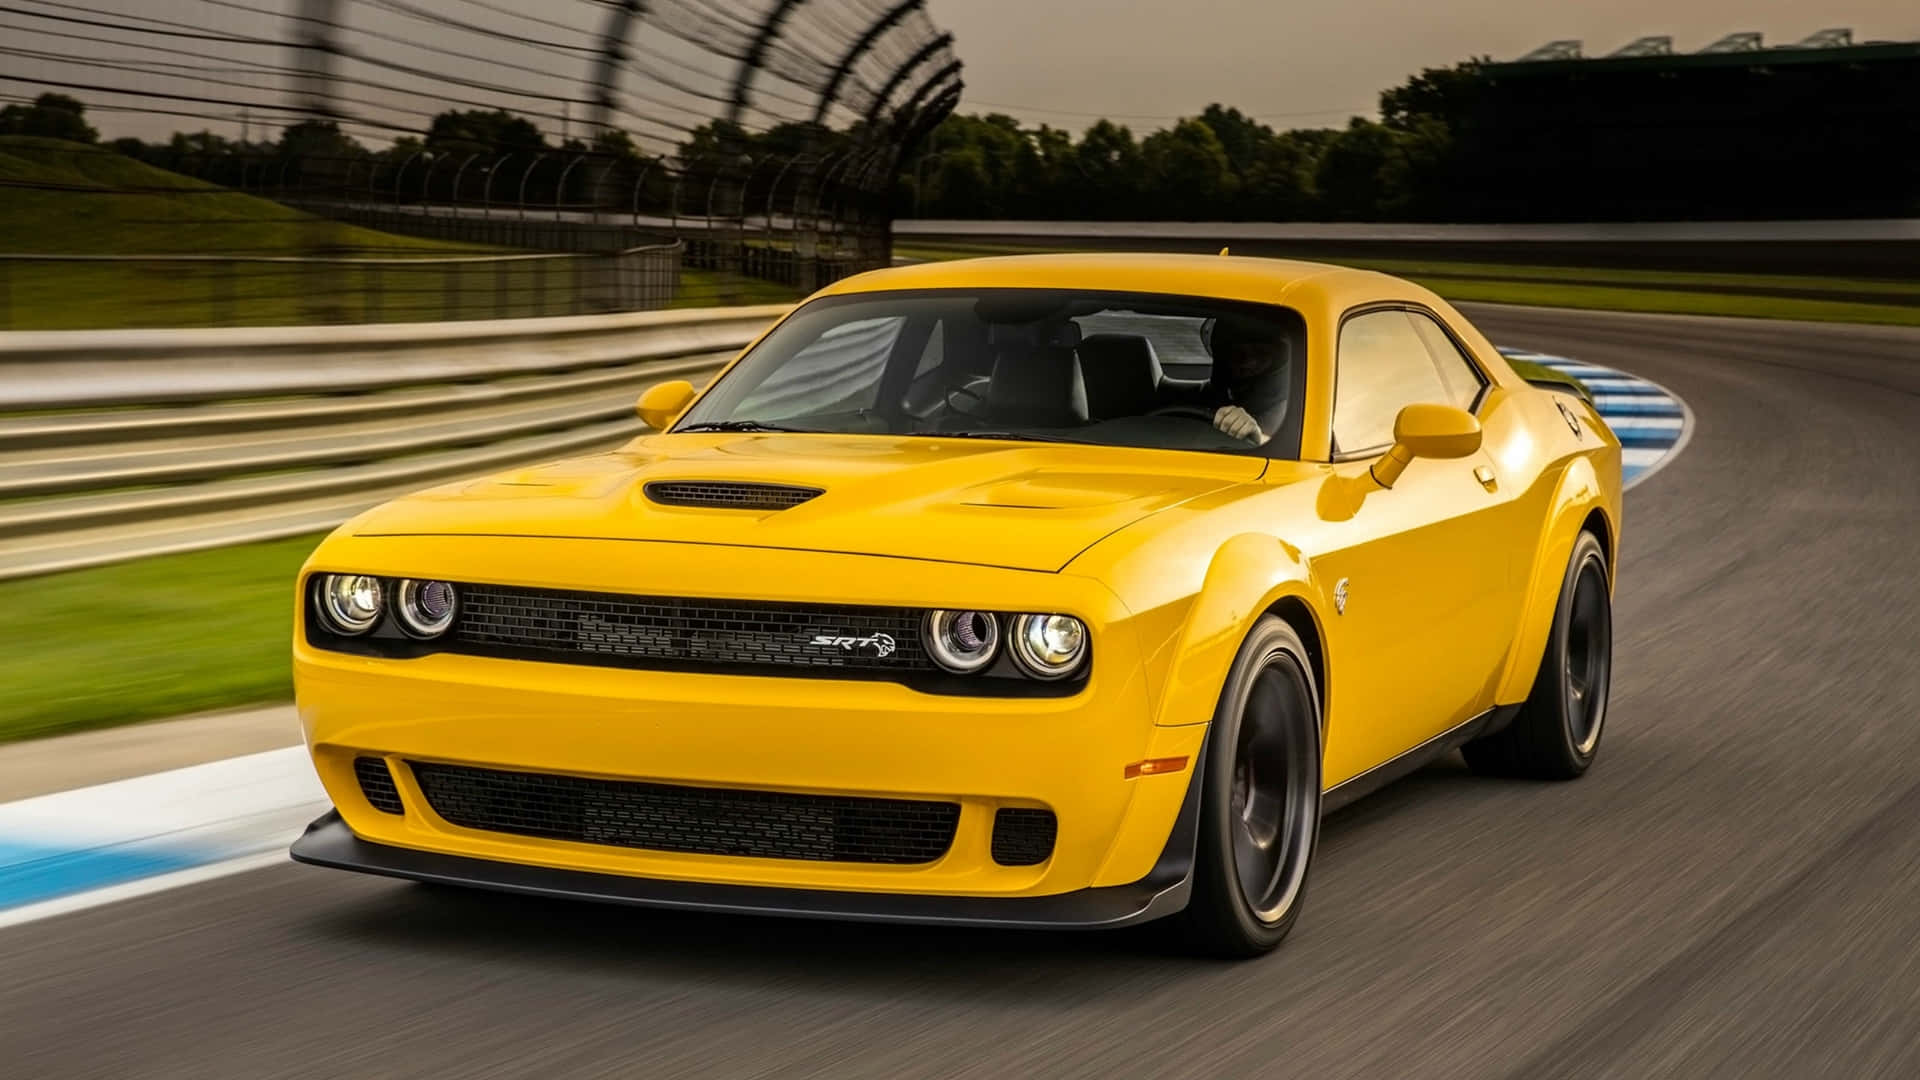 The Yellow Dodge Challenger Is Driving On A Race Track